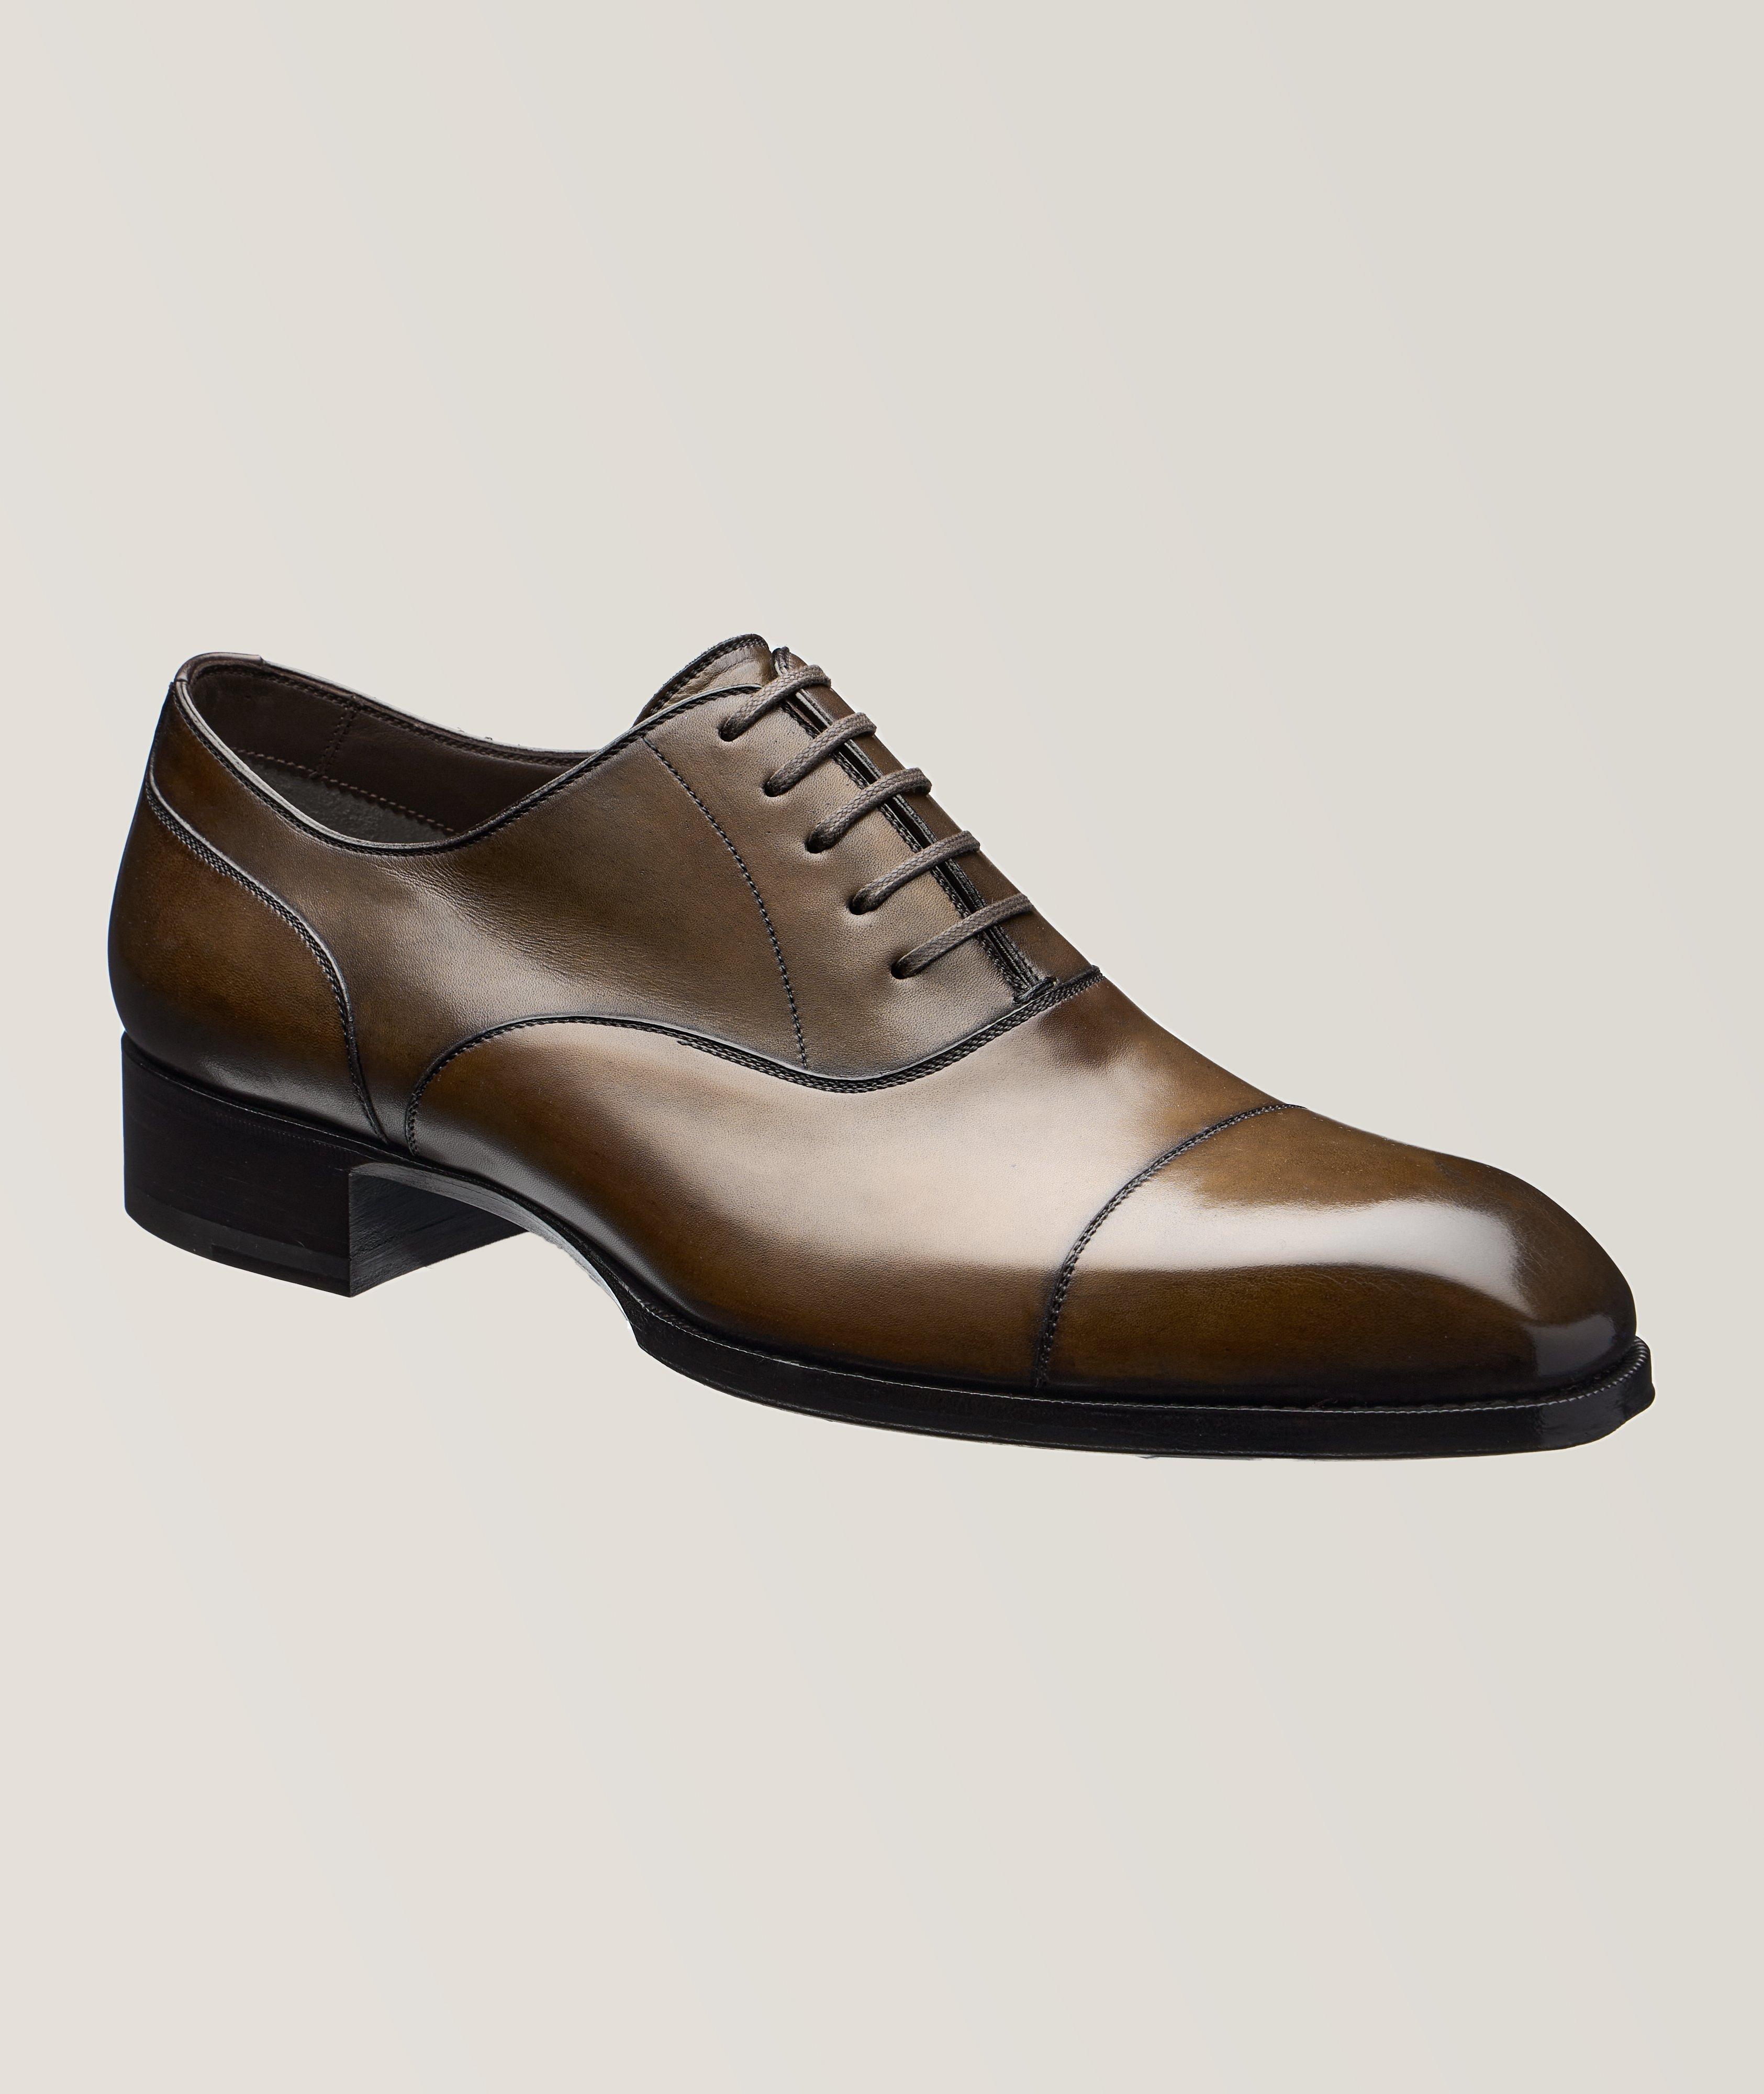 TOM FORD Burnished Leather Cap-Toe Oxfords